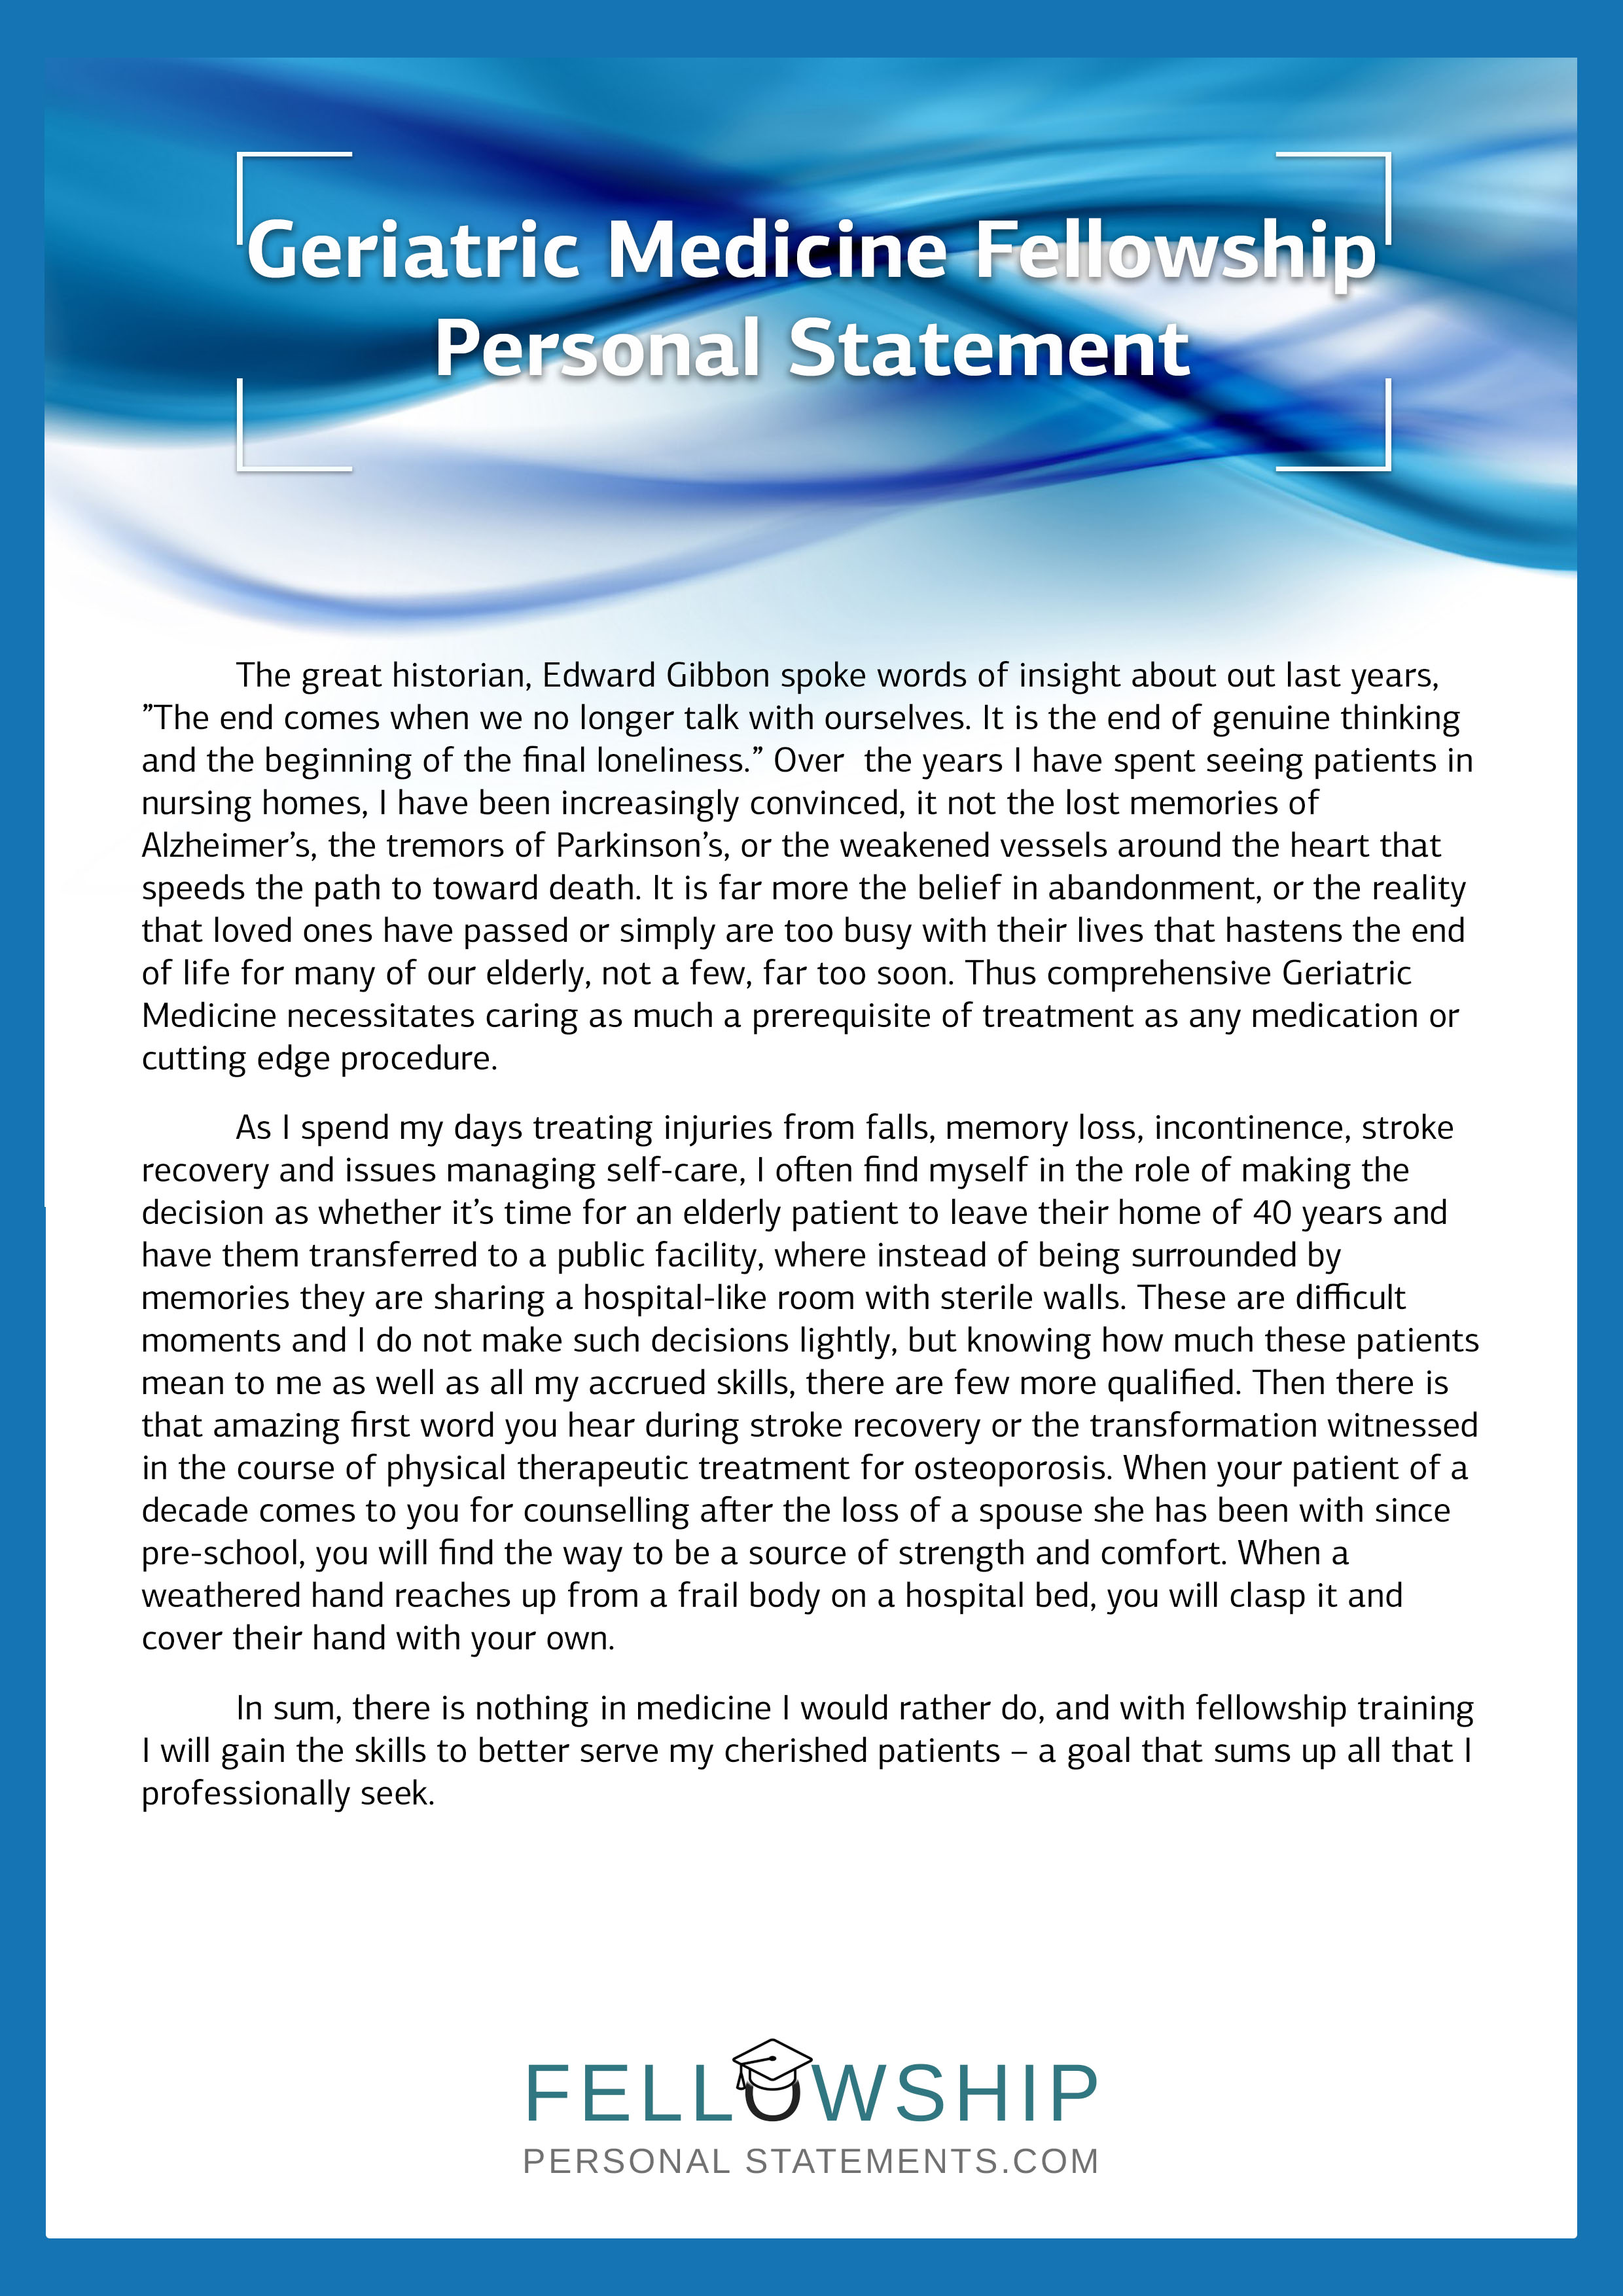 research fellowship personal statement